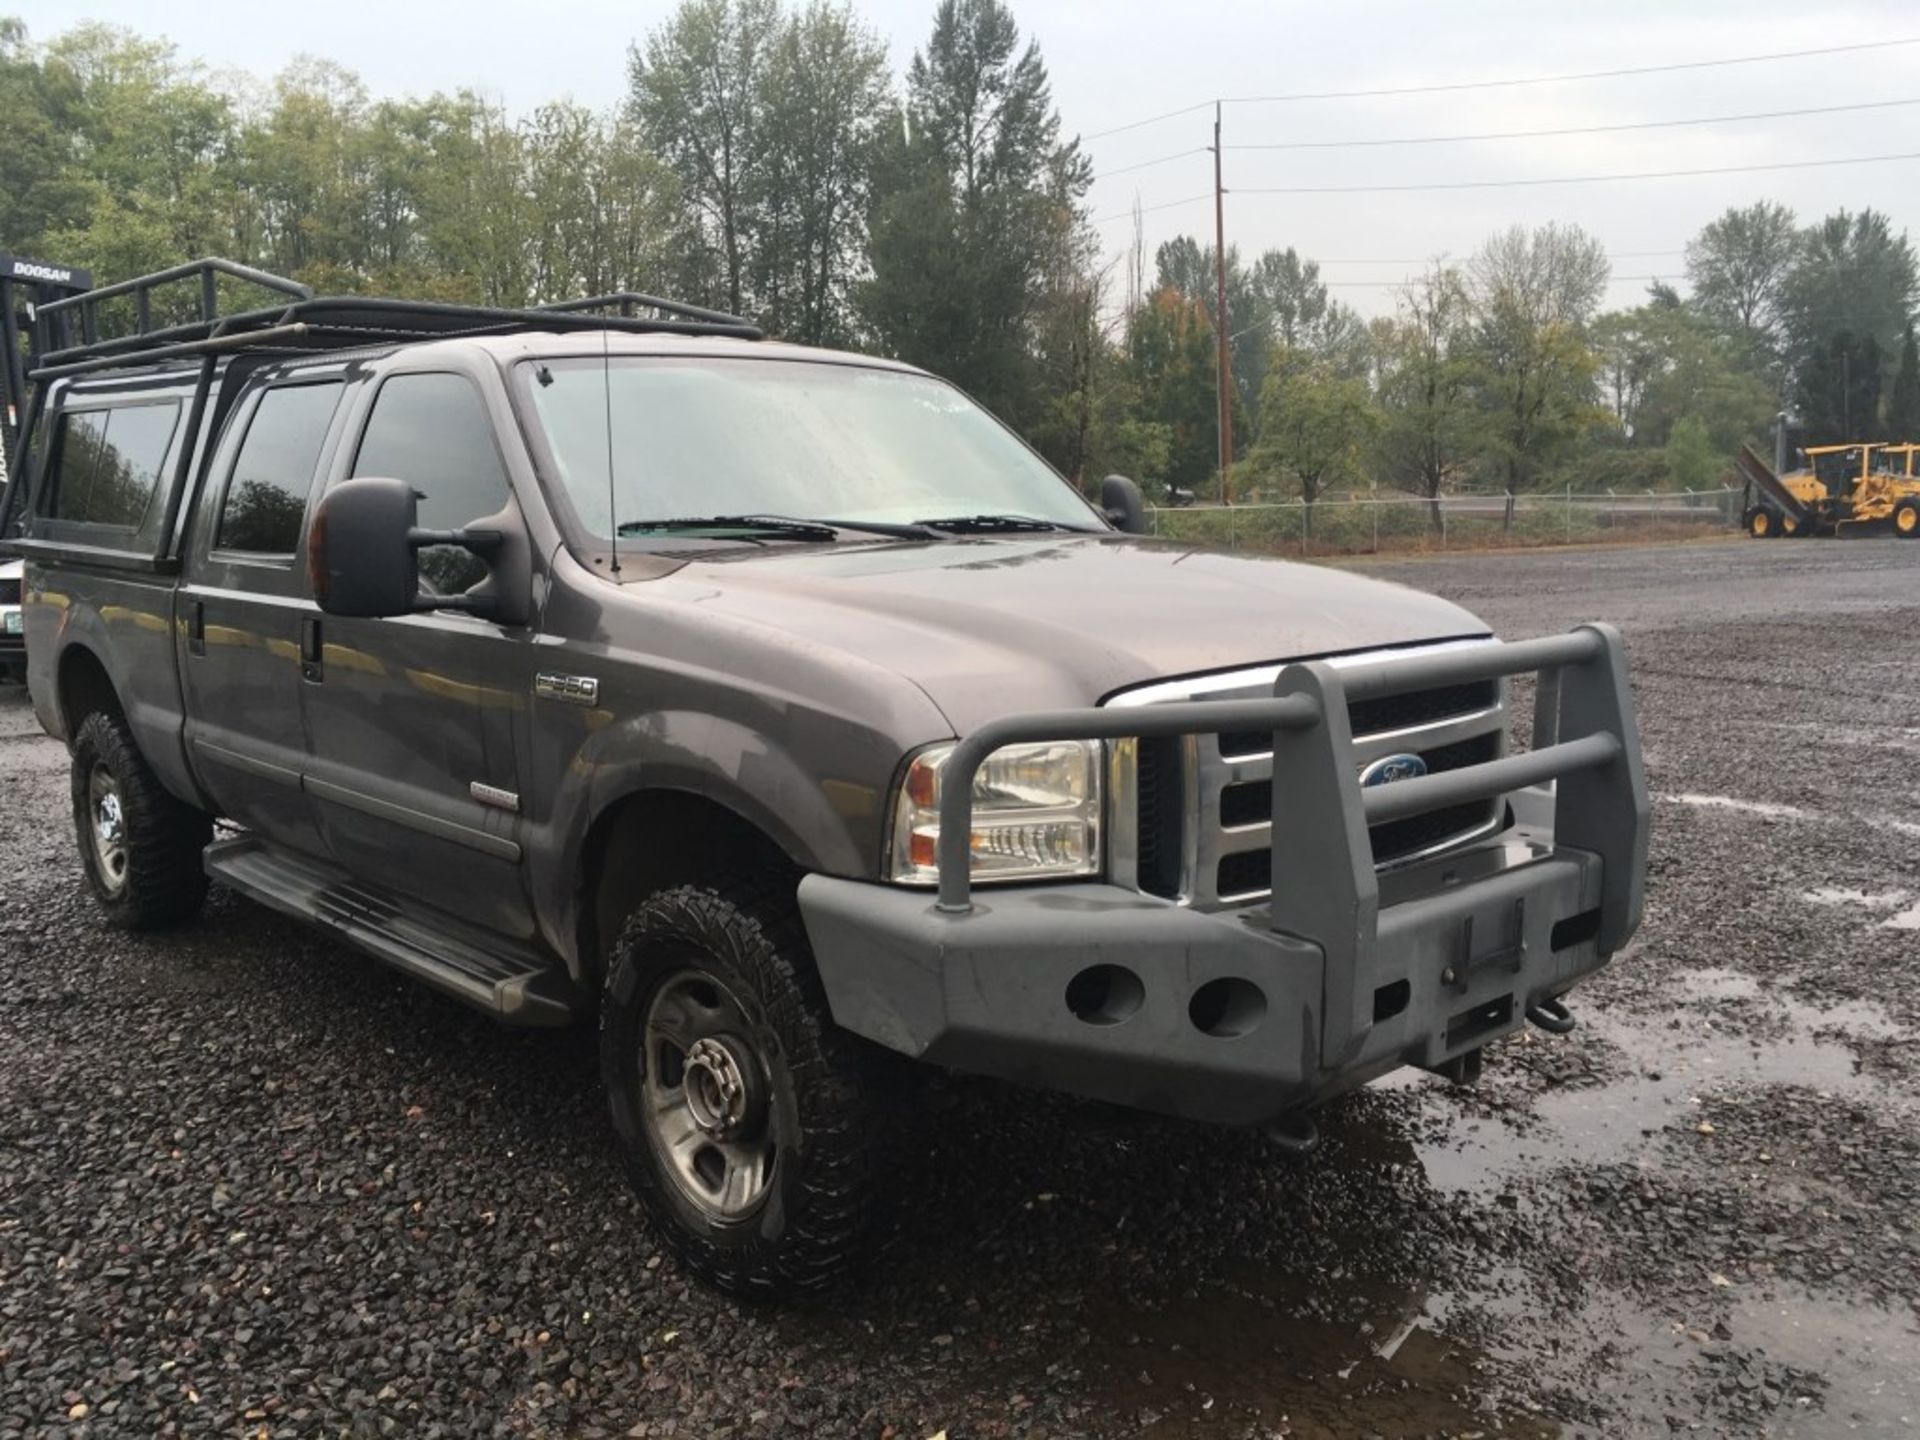 2007 Ford F350 XLT 4x4 Crew Cab Pickup - Image 2 of 30